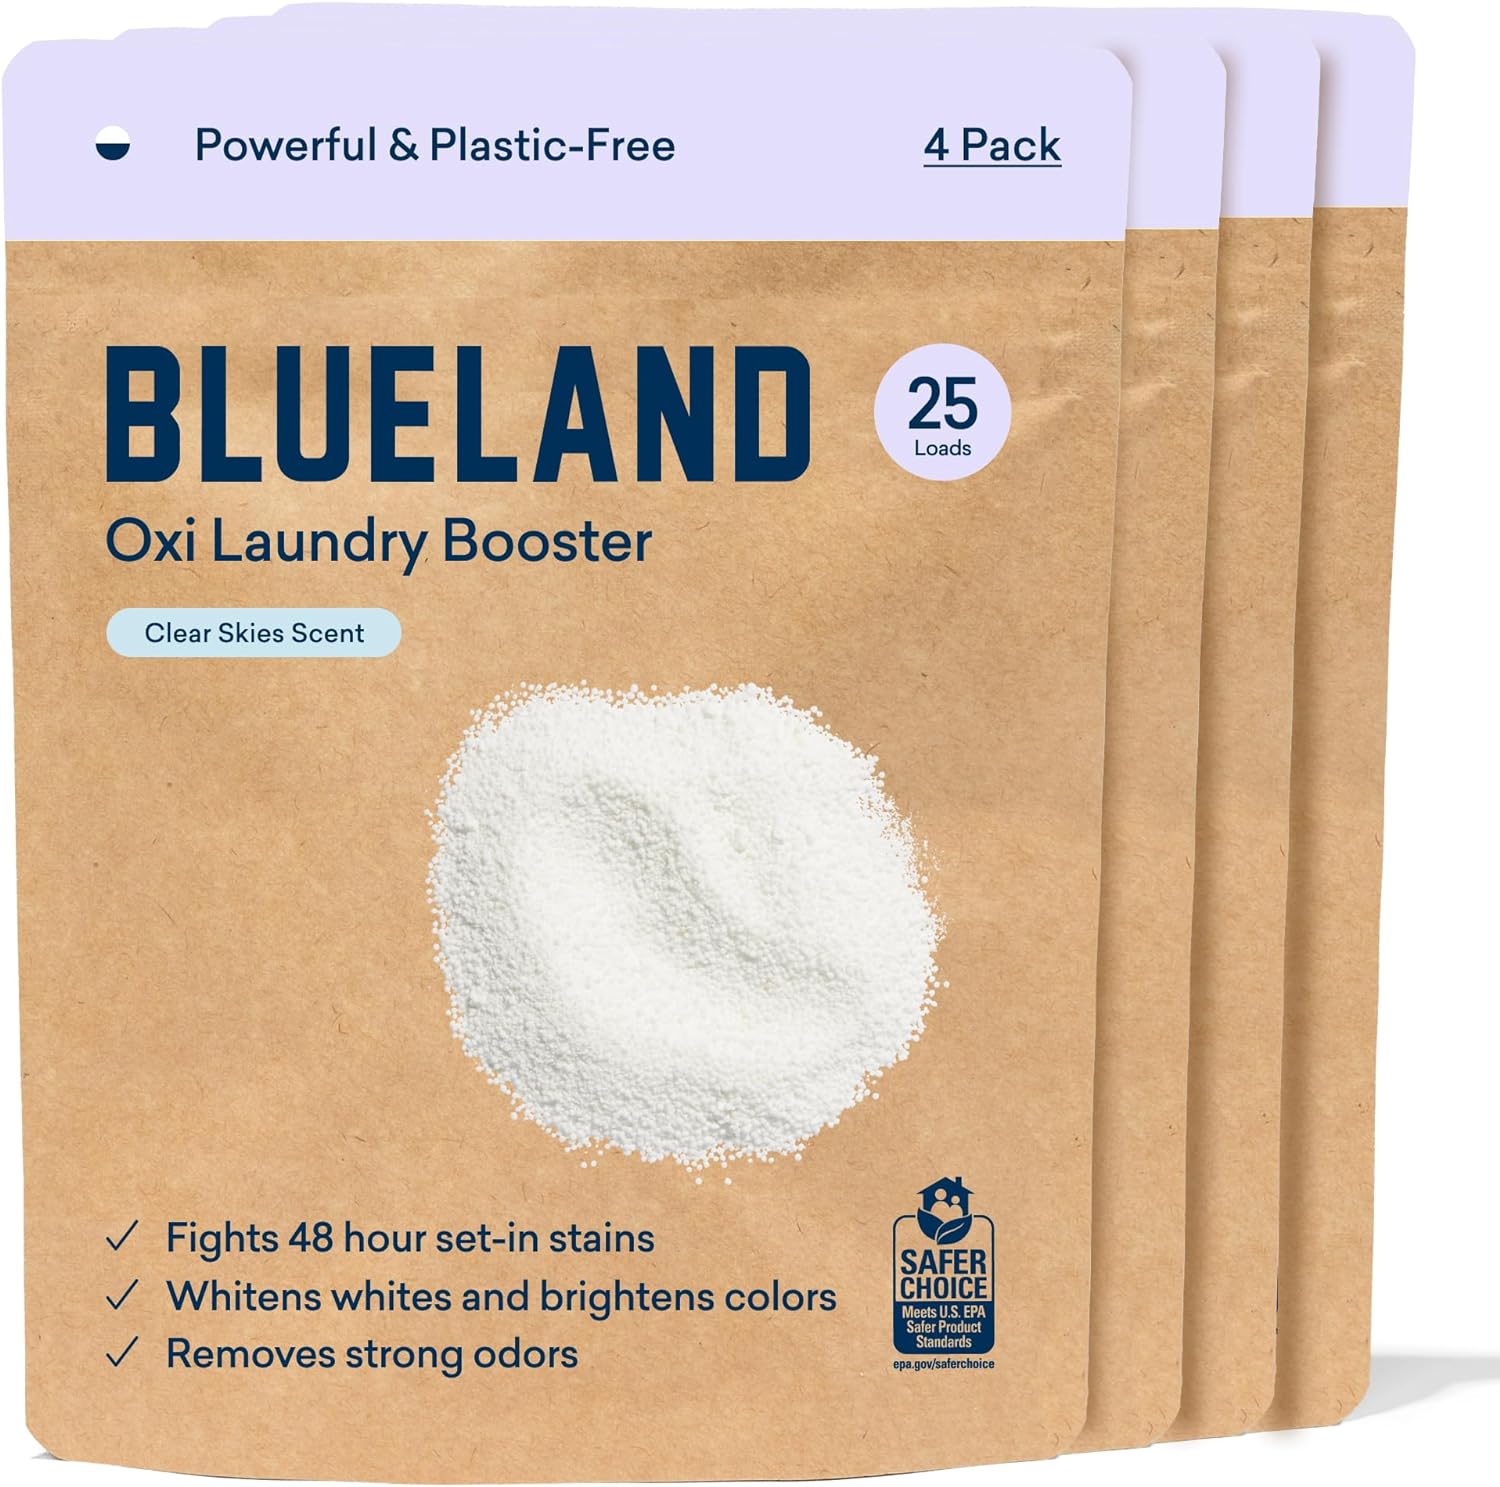 BLUELAND Oxi Laundry Booster Powder Refill 4 Pack - Plastic-Free & Eco Friendly Oxy Cleaner - Plant Based Stain Remover - Clear Skies Scented - 70.4oz, 100 Loads